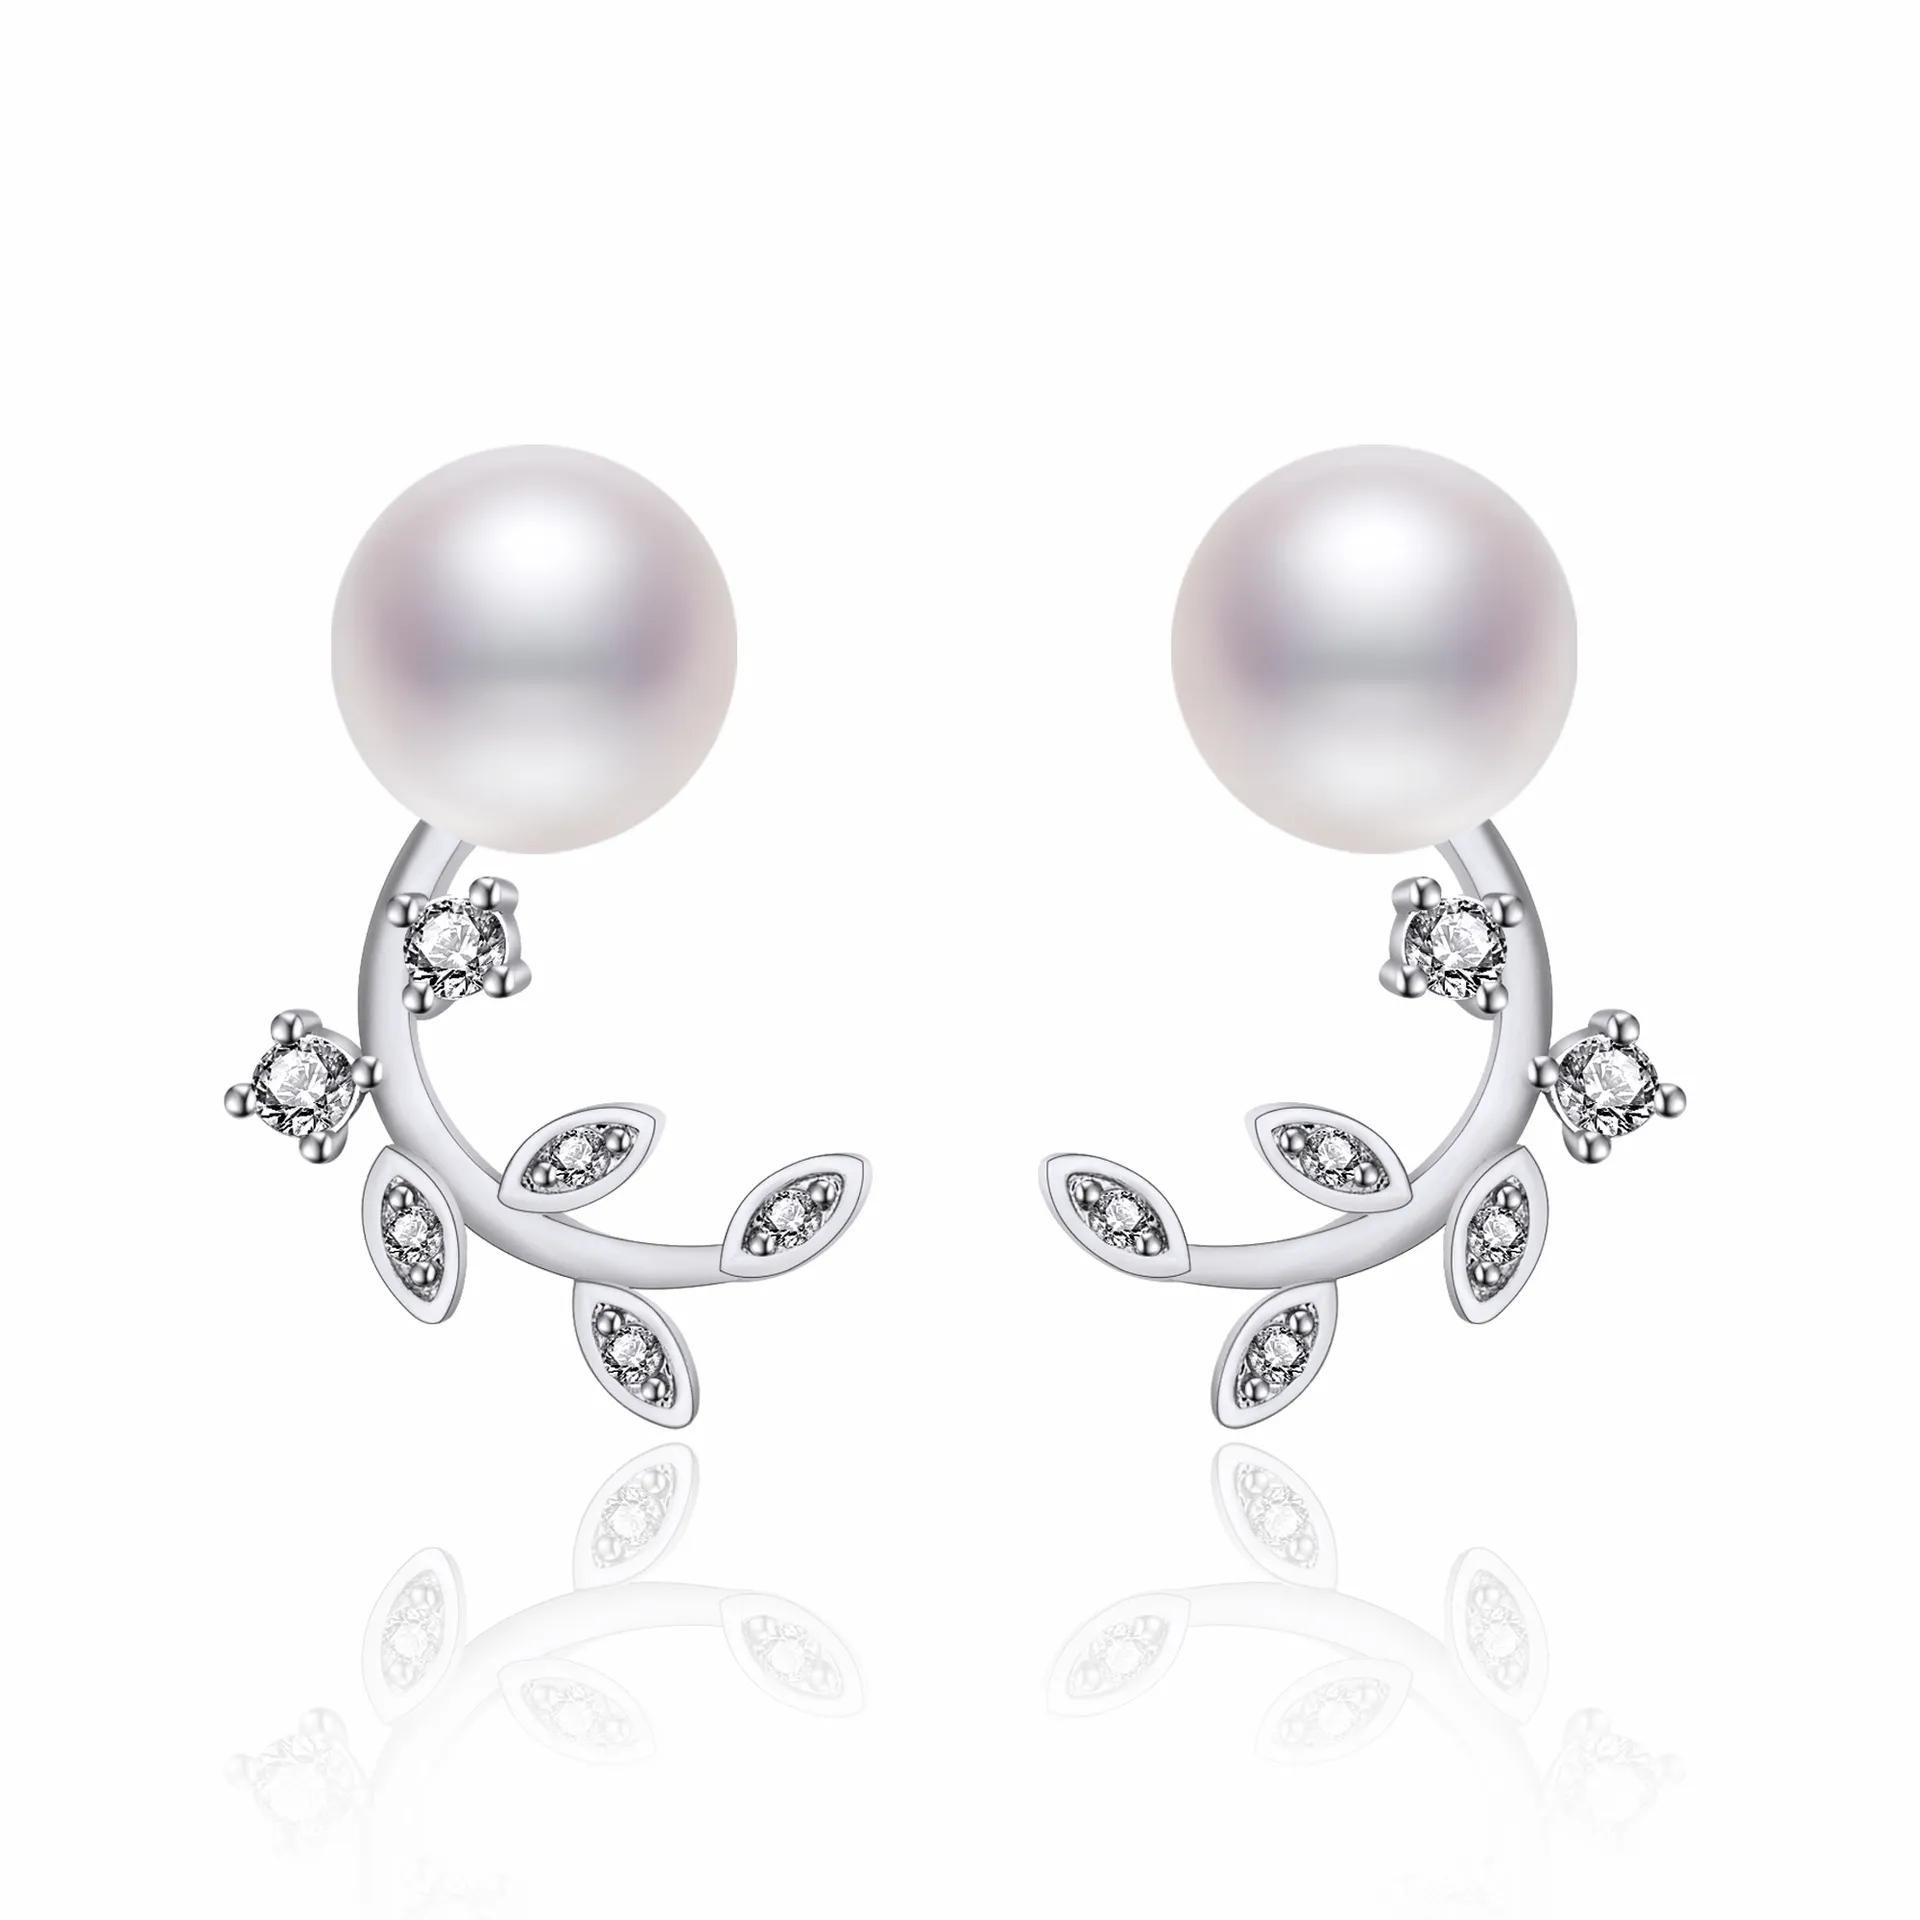 Popular Girl's CZ Leaf Pearl Ear Studs Jewelry Rose Gold/Platinum Plated Silver Stud Earings for Date OL Fashion Jewelry